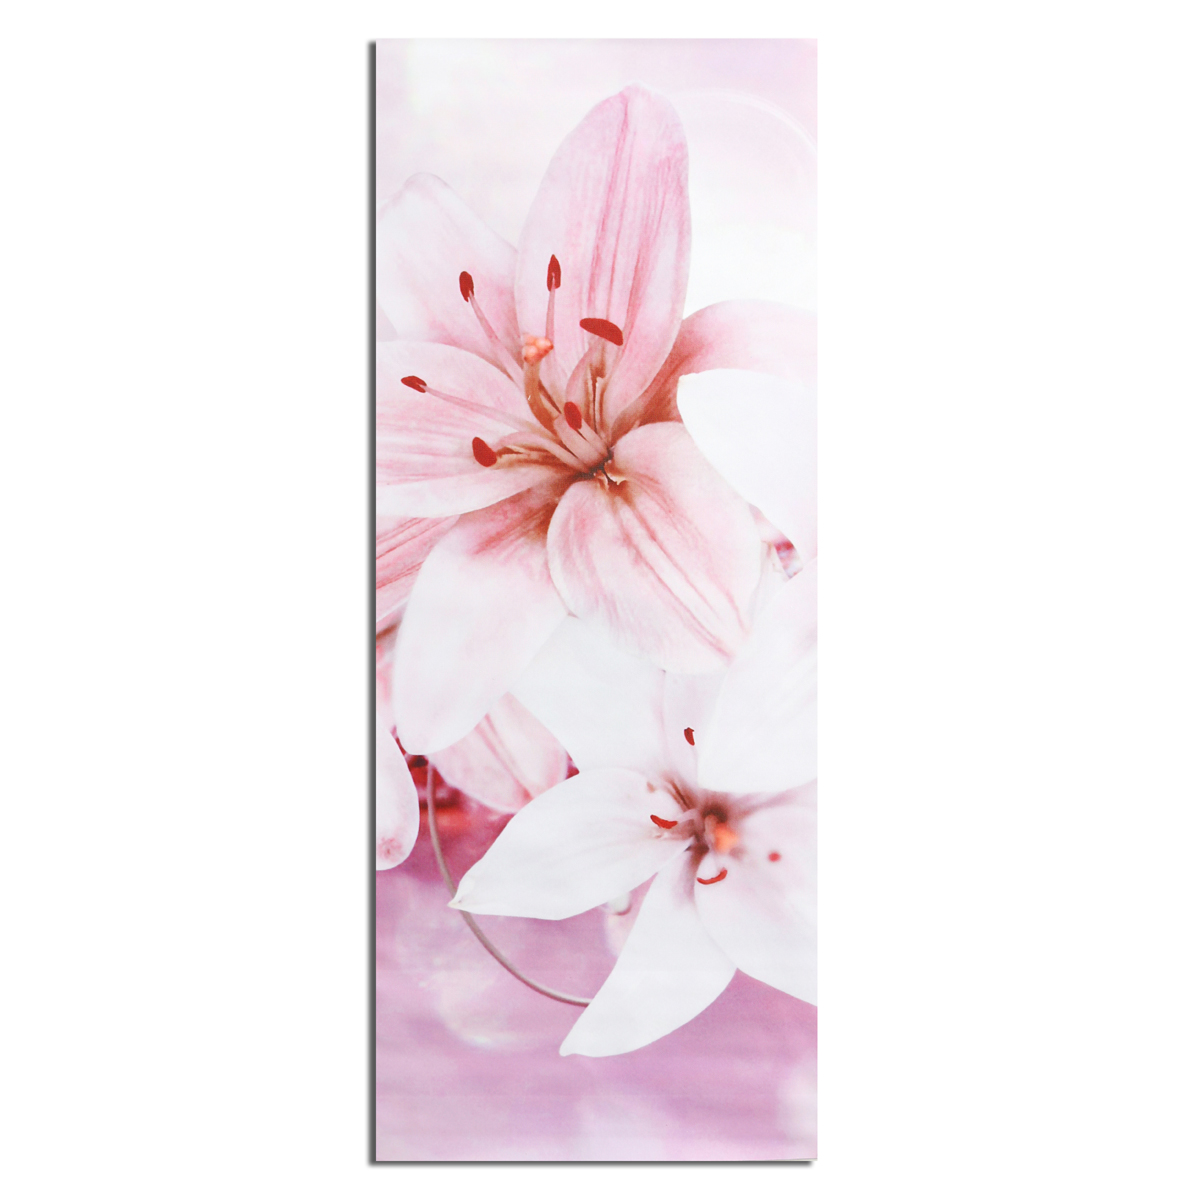 5PCS-Frameless-Canvas-Paintings-Lilies-Art-Paint-for-Home-Wall-Decoration-1080757-3